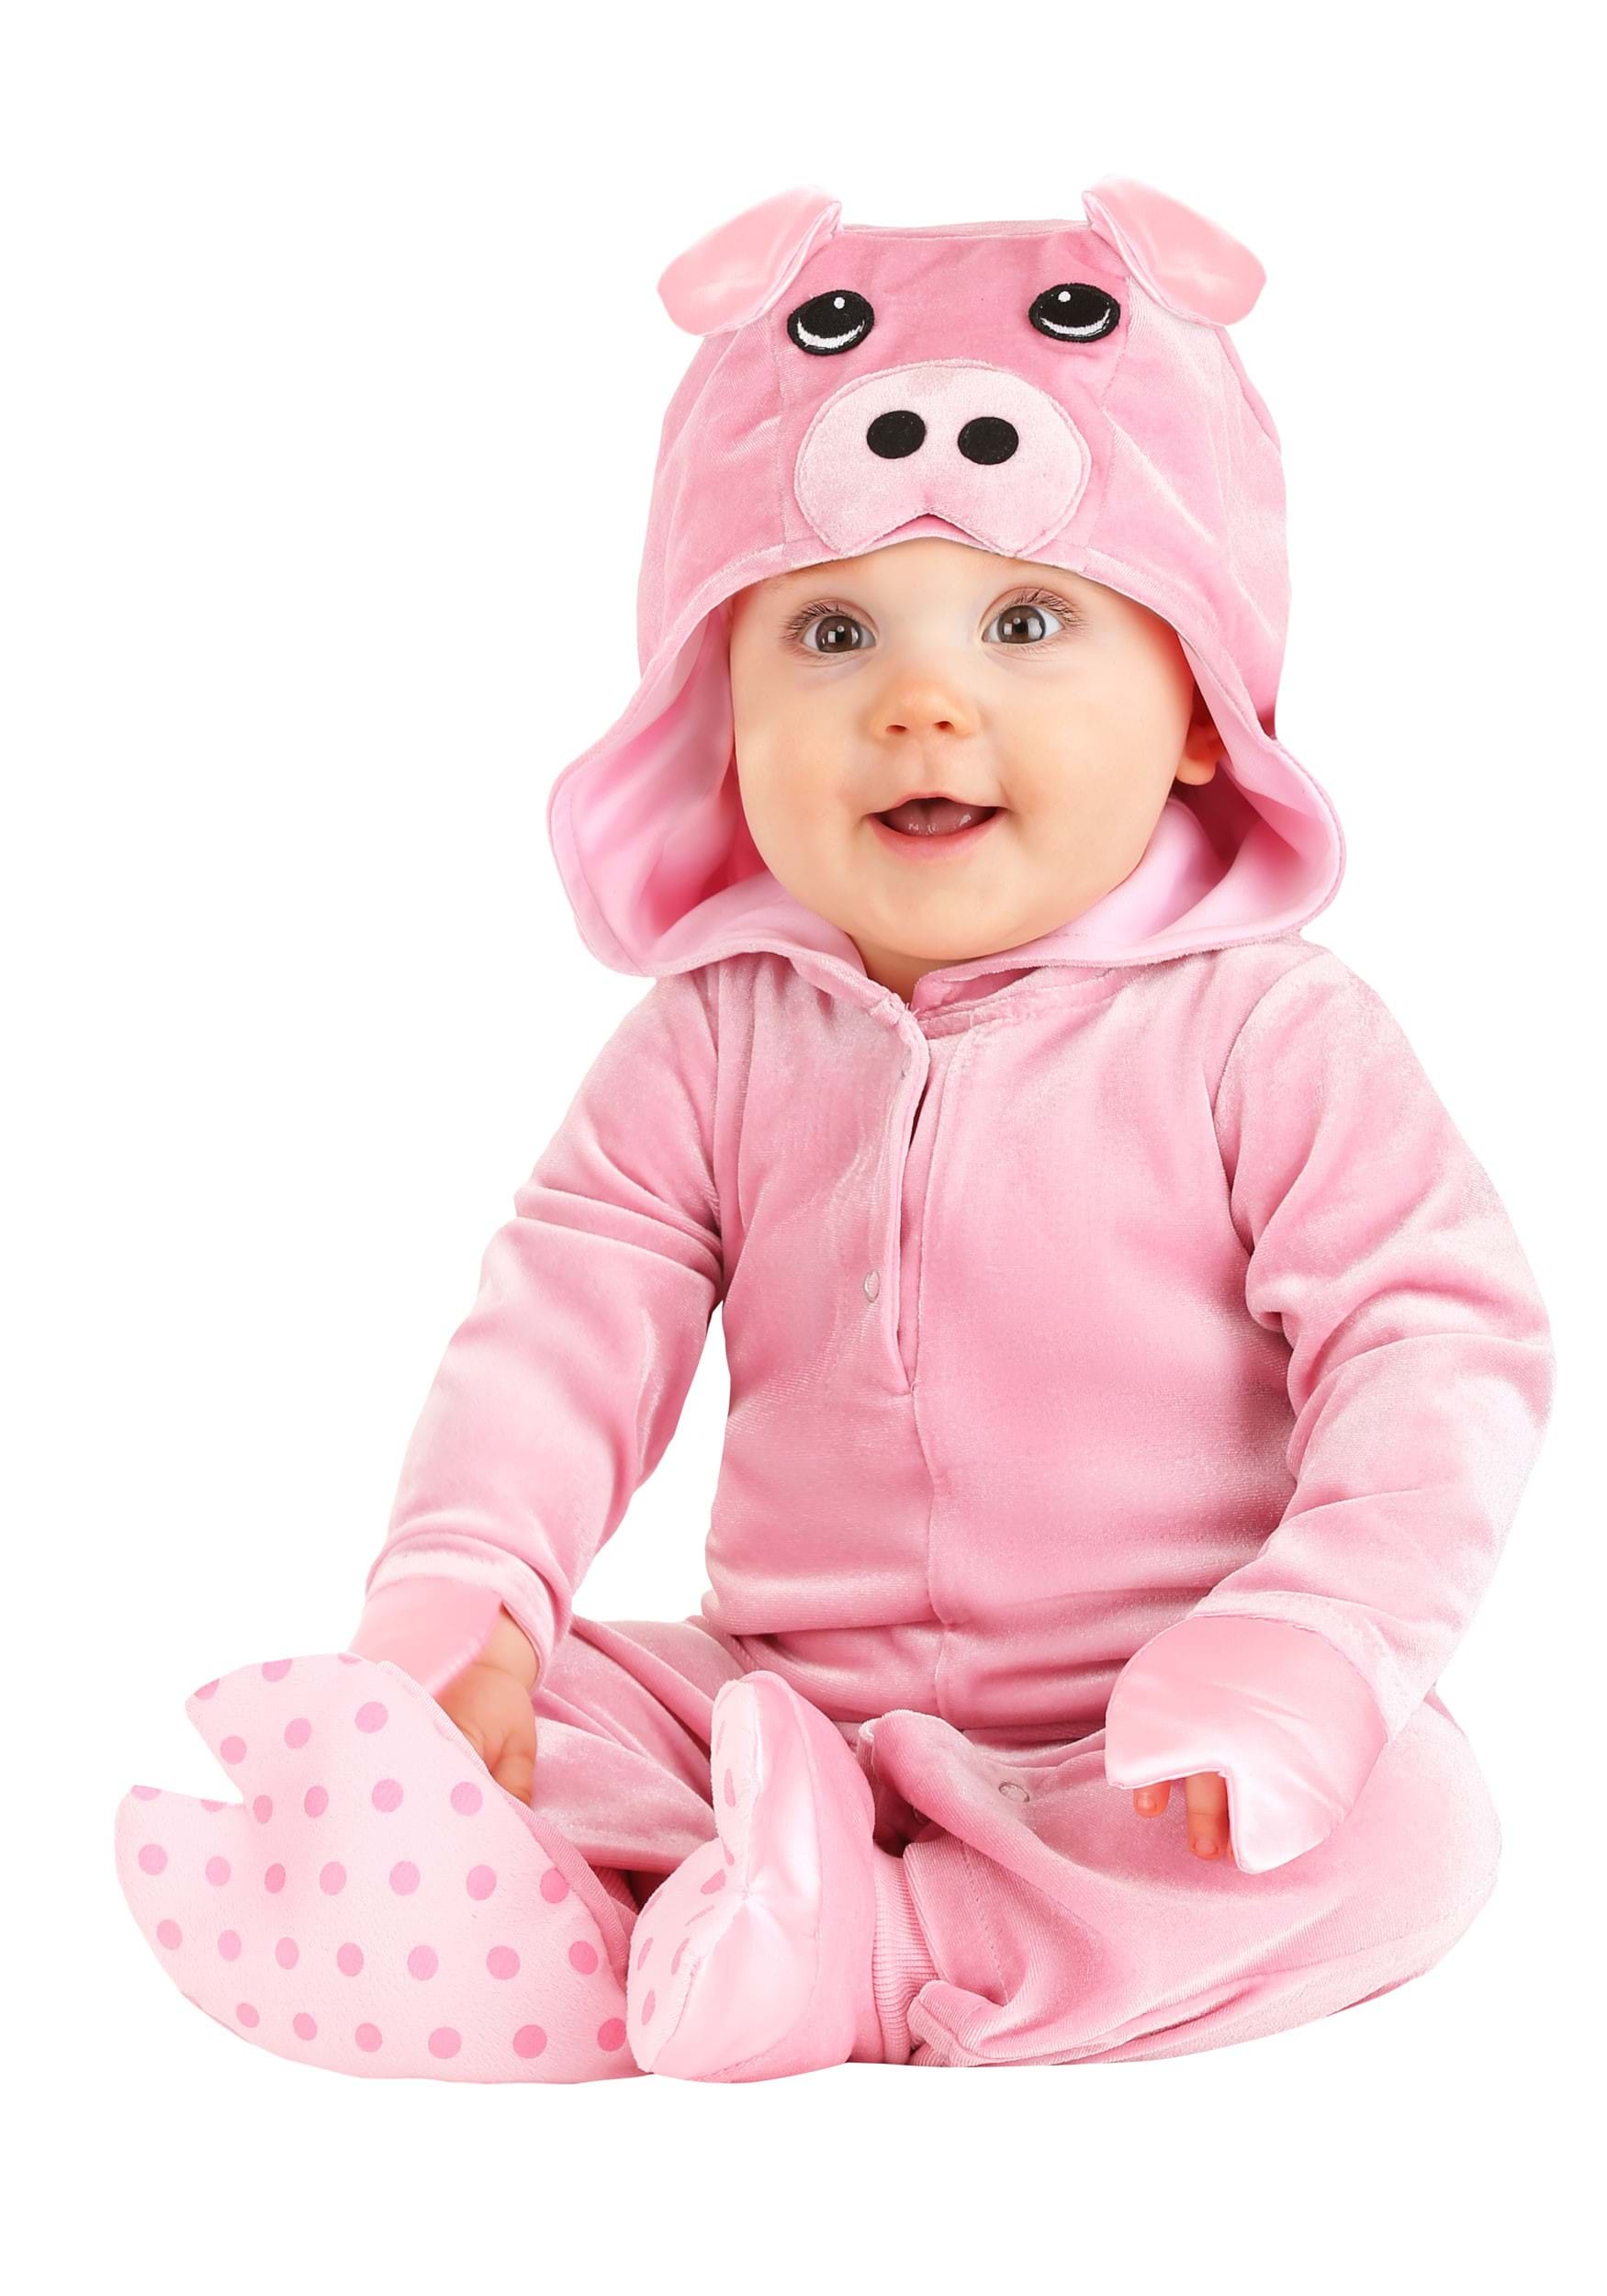 Photos - Fancy Dress FUN Costumes Rosy Pig Infant Costume Pink FUN1571IN